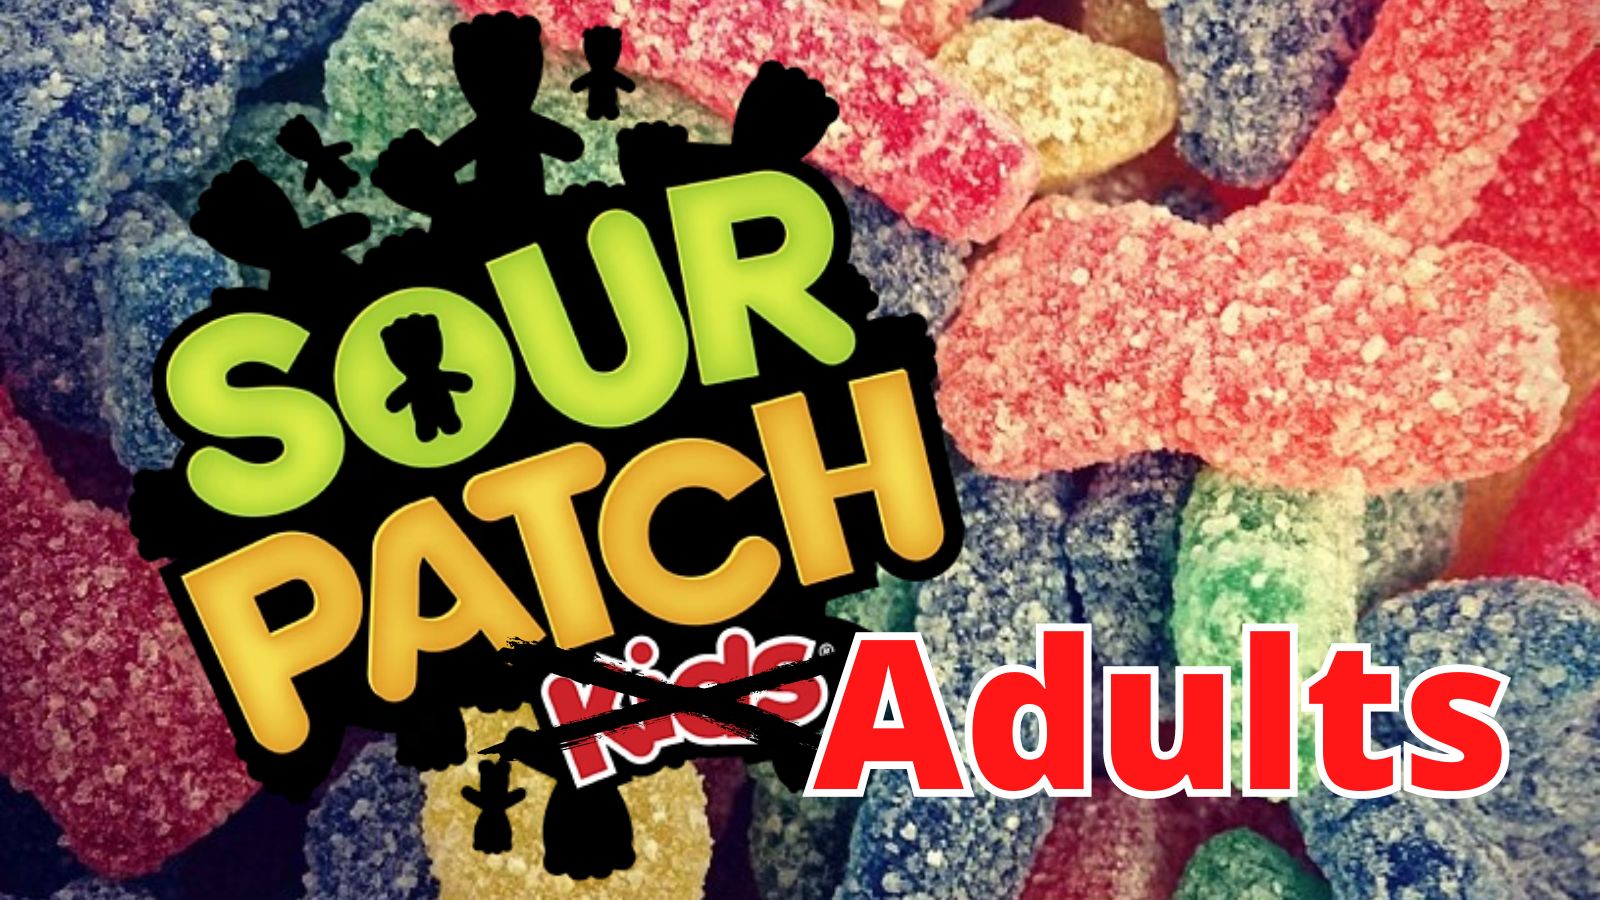 Sour Patch Kids become Sour Patch Adults in apparent April Fools joke